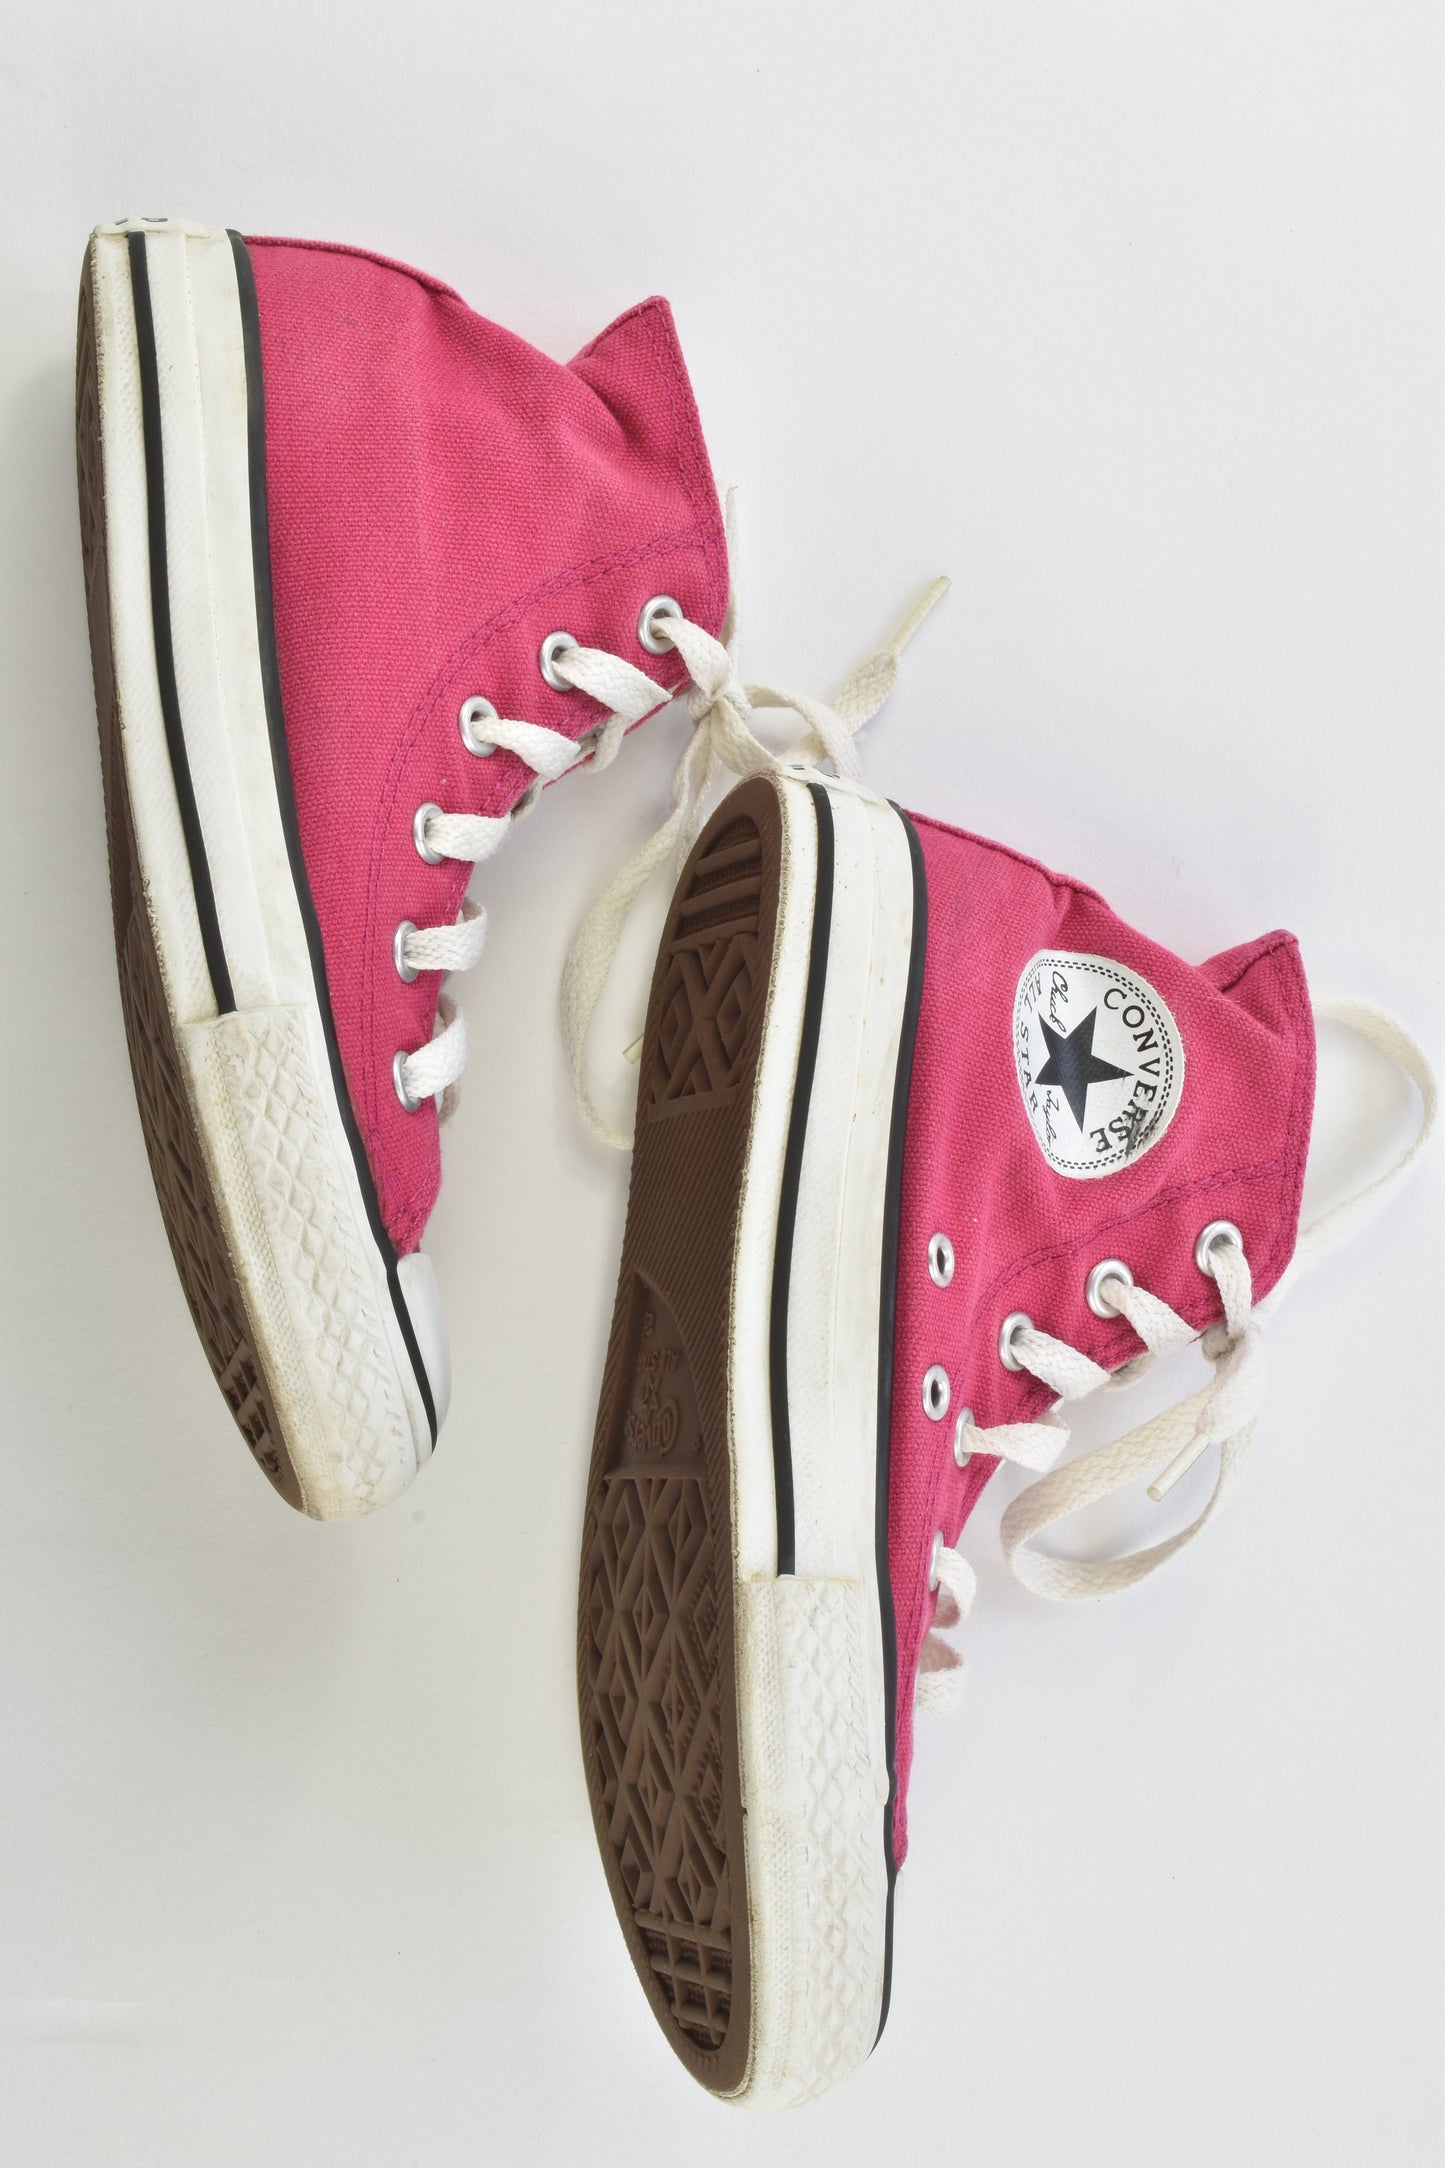 Converse All Star Size UK 12 Shoes